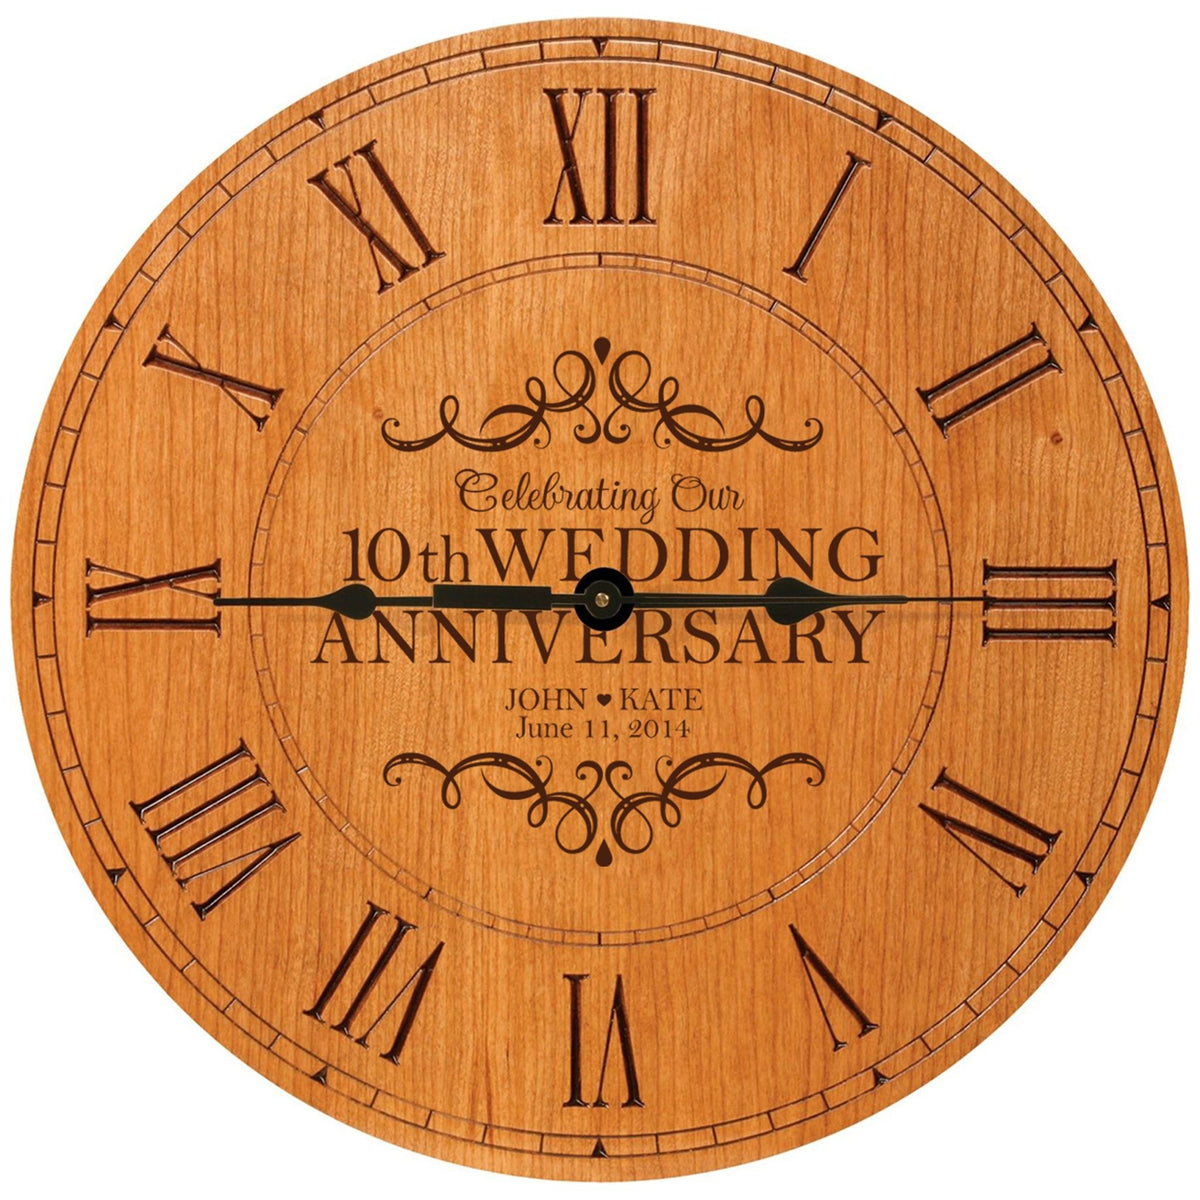 Lifesong Milestones Personalized Engraved Wooden Wall Clock for 10th Wedding Anniversary Gift Ideas